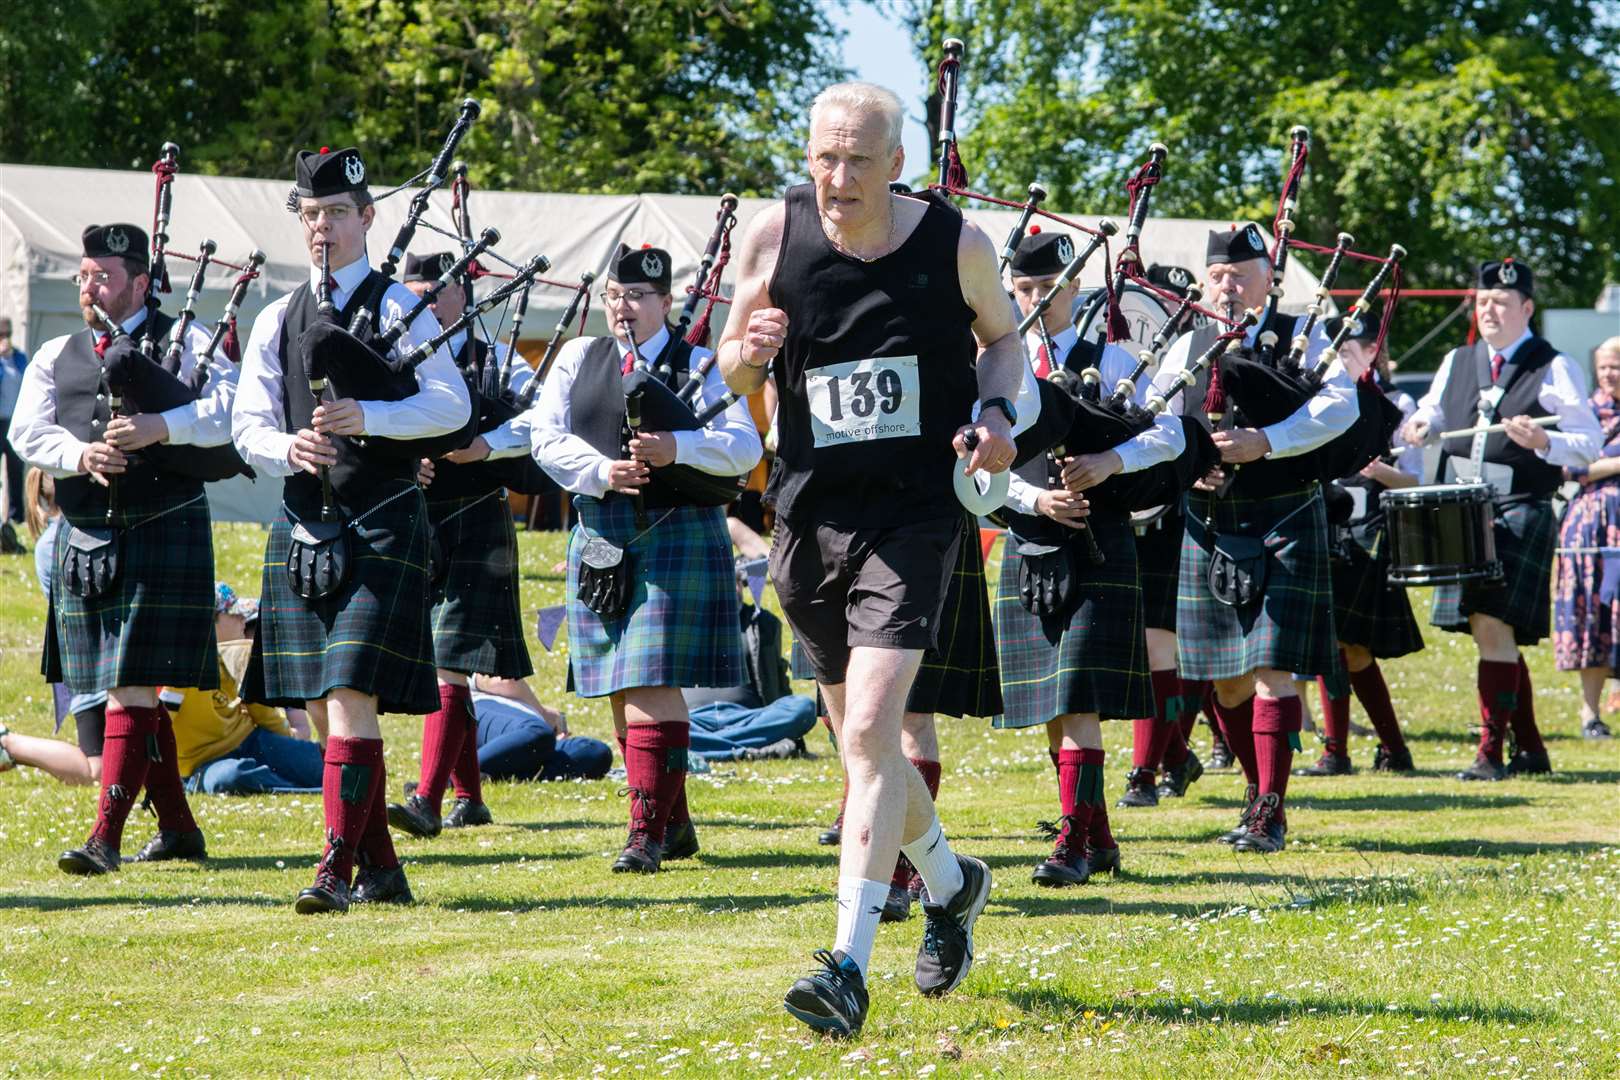 Knock Hill Race Runner #139 Charlie Simpson runs past the Portsoy Pipe Band as he approaches the finish of the race...Cornhill Highland Games - Saturday 4th June 2022...Picture: Daniel Forsyth..